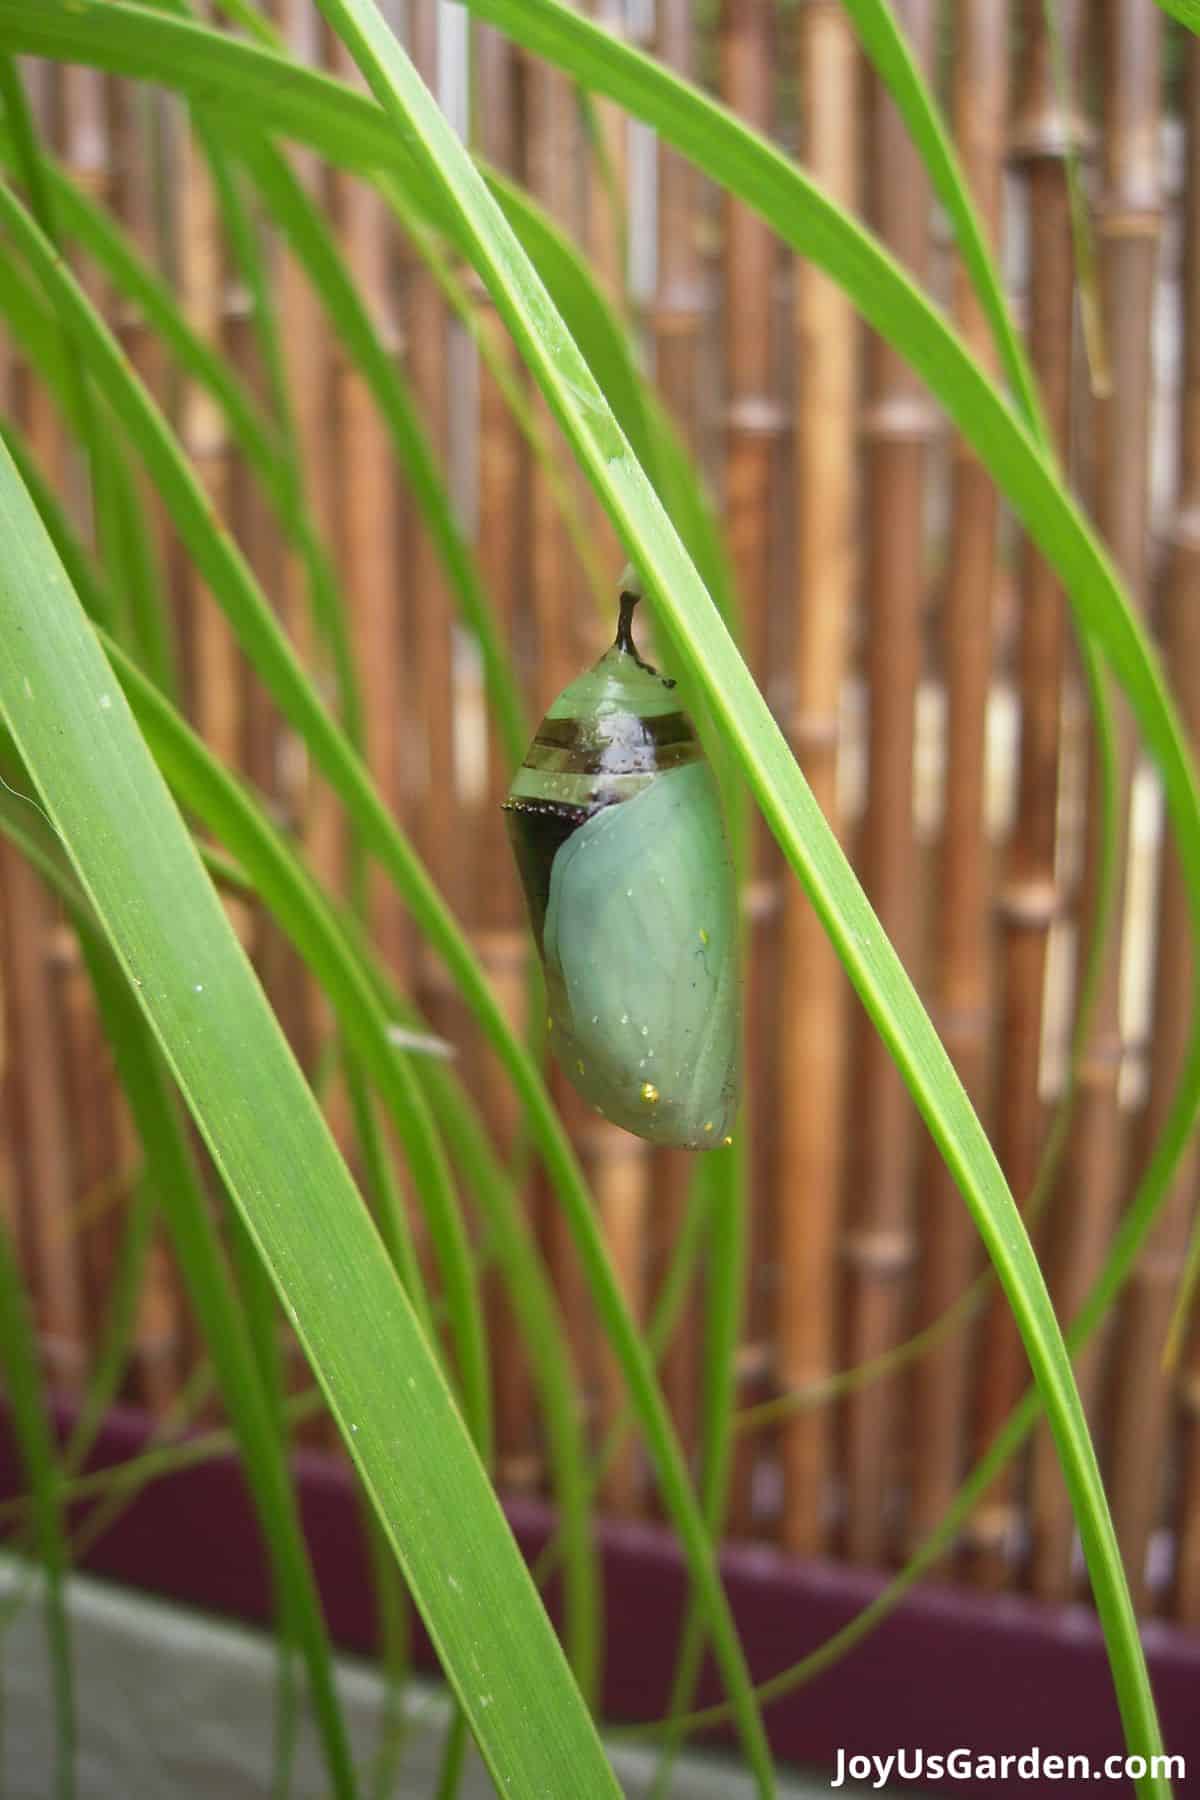 chrysalis on a ponytail palm chrysalis is semi-translucent and shows wings starting to form